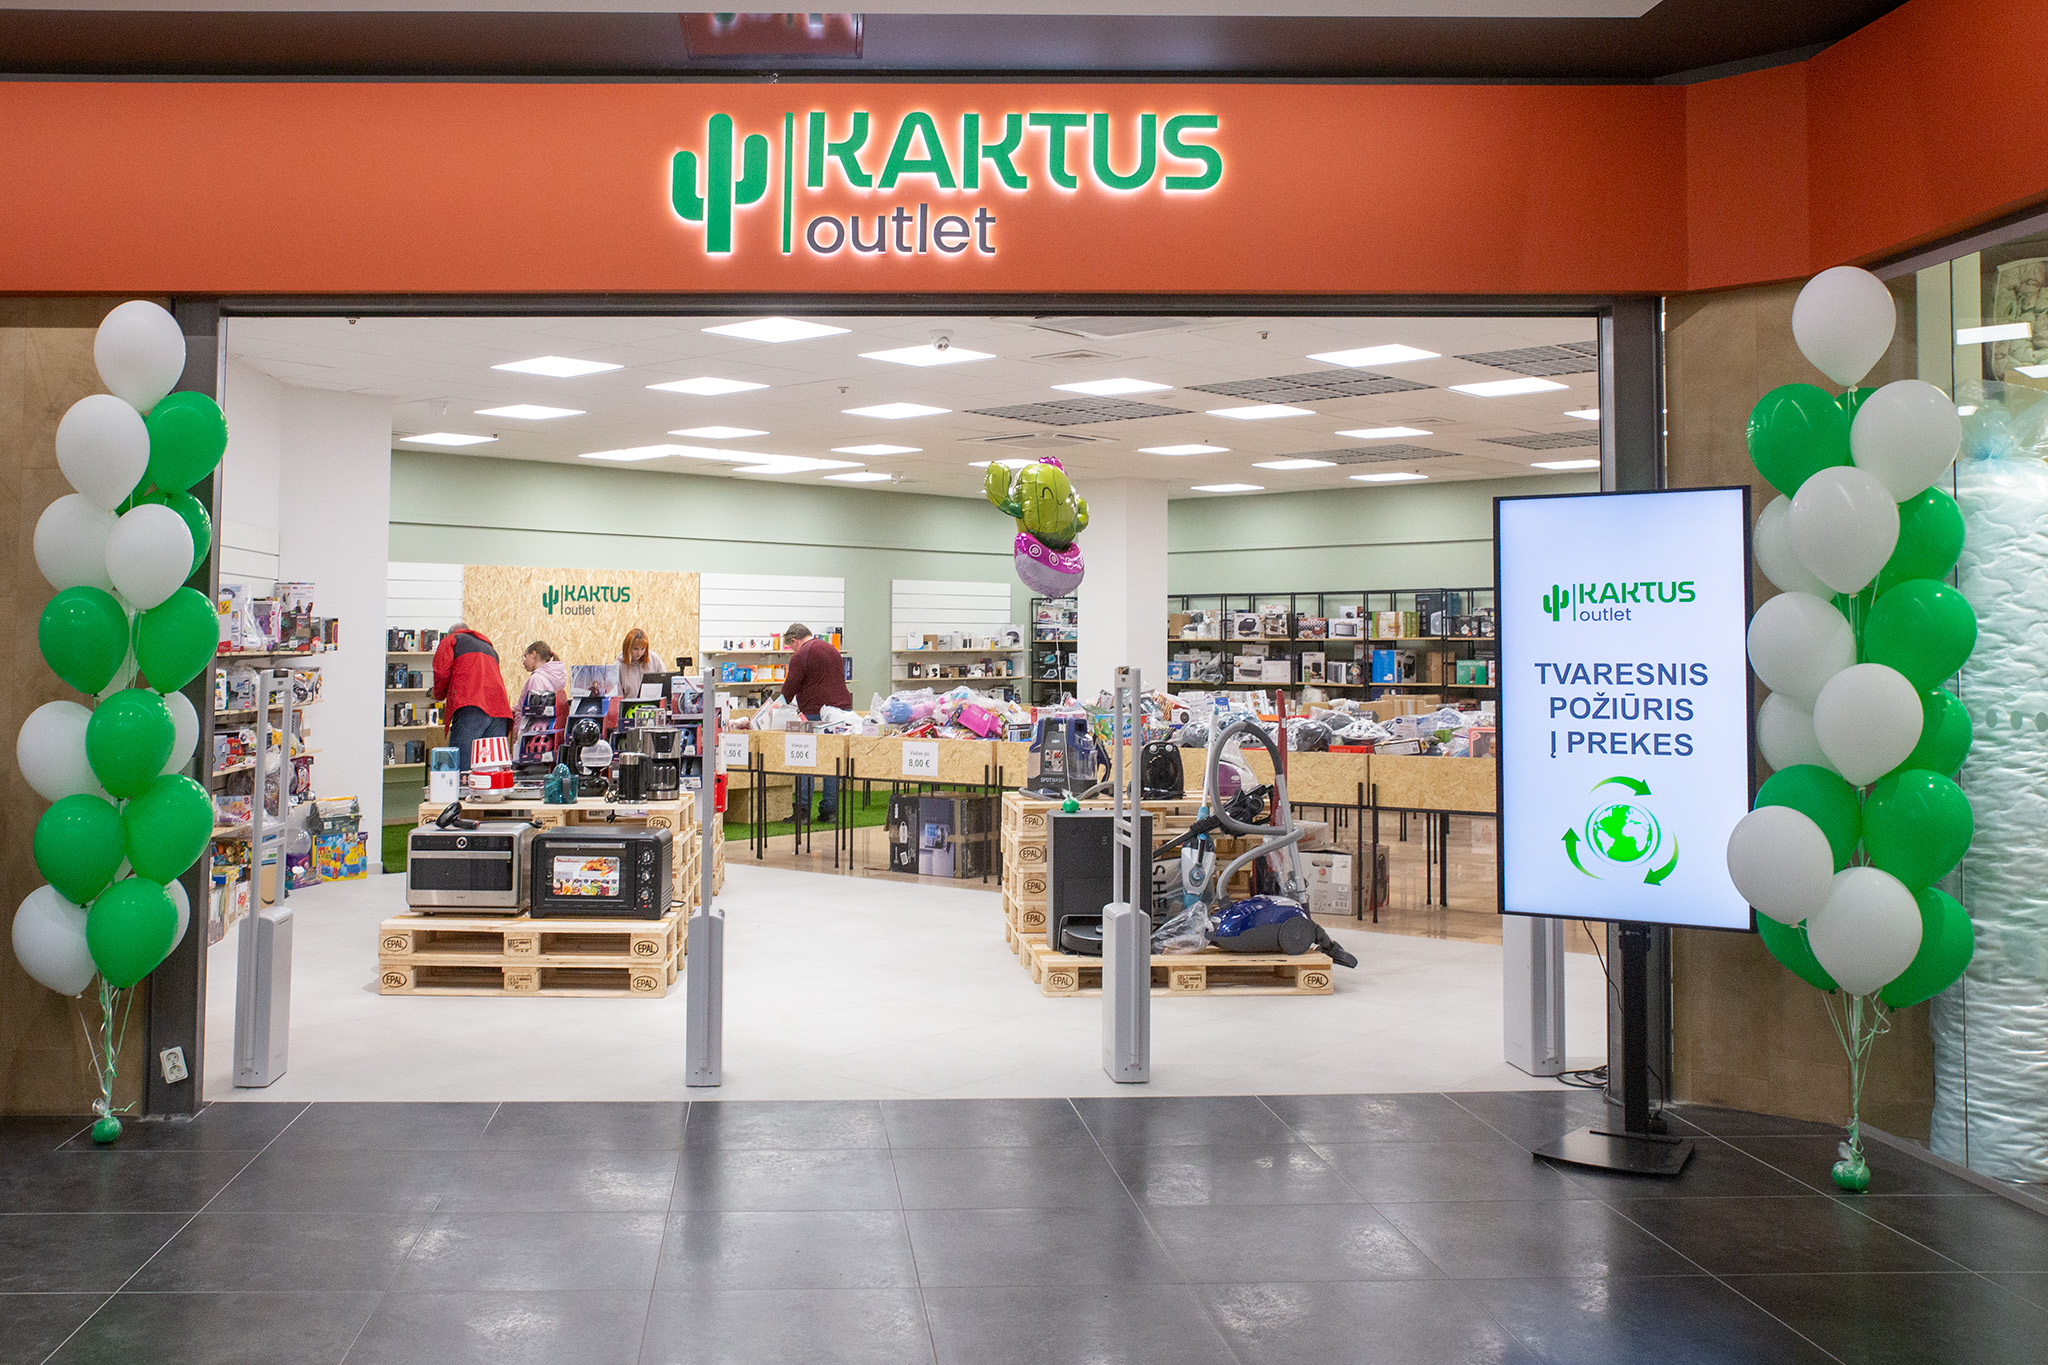 cup-kaktus-outlet-nuotrauka16